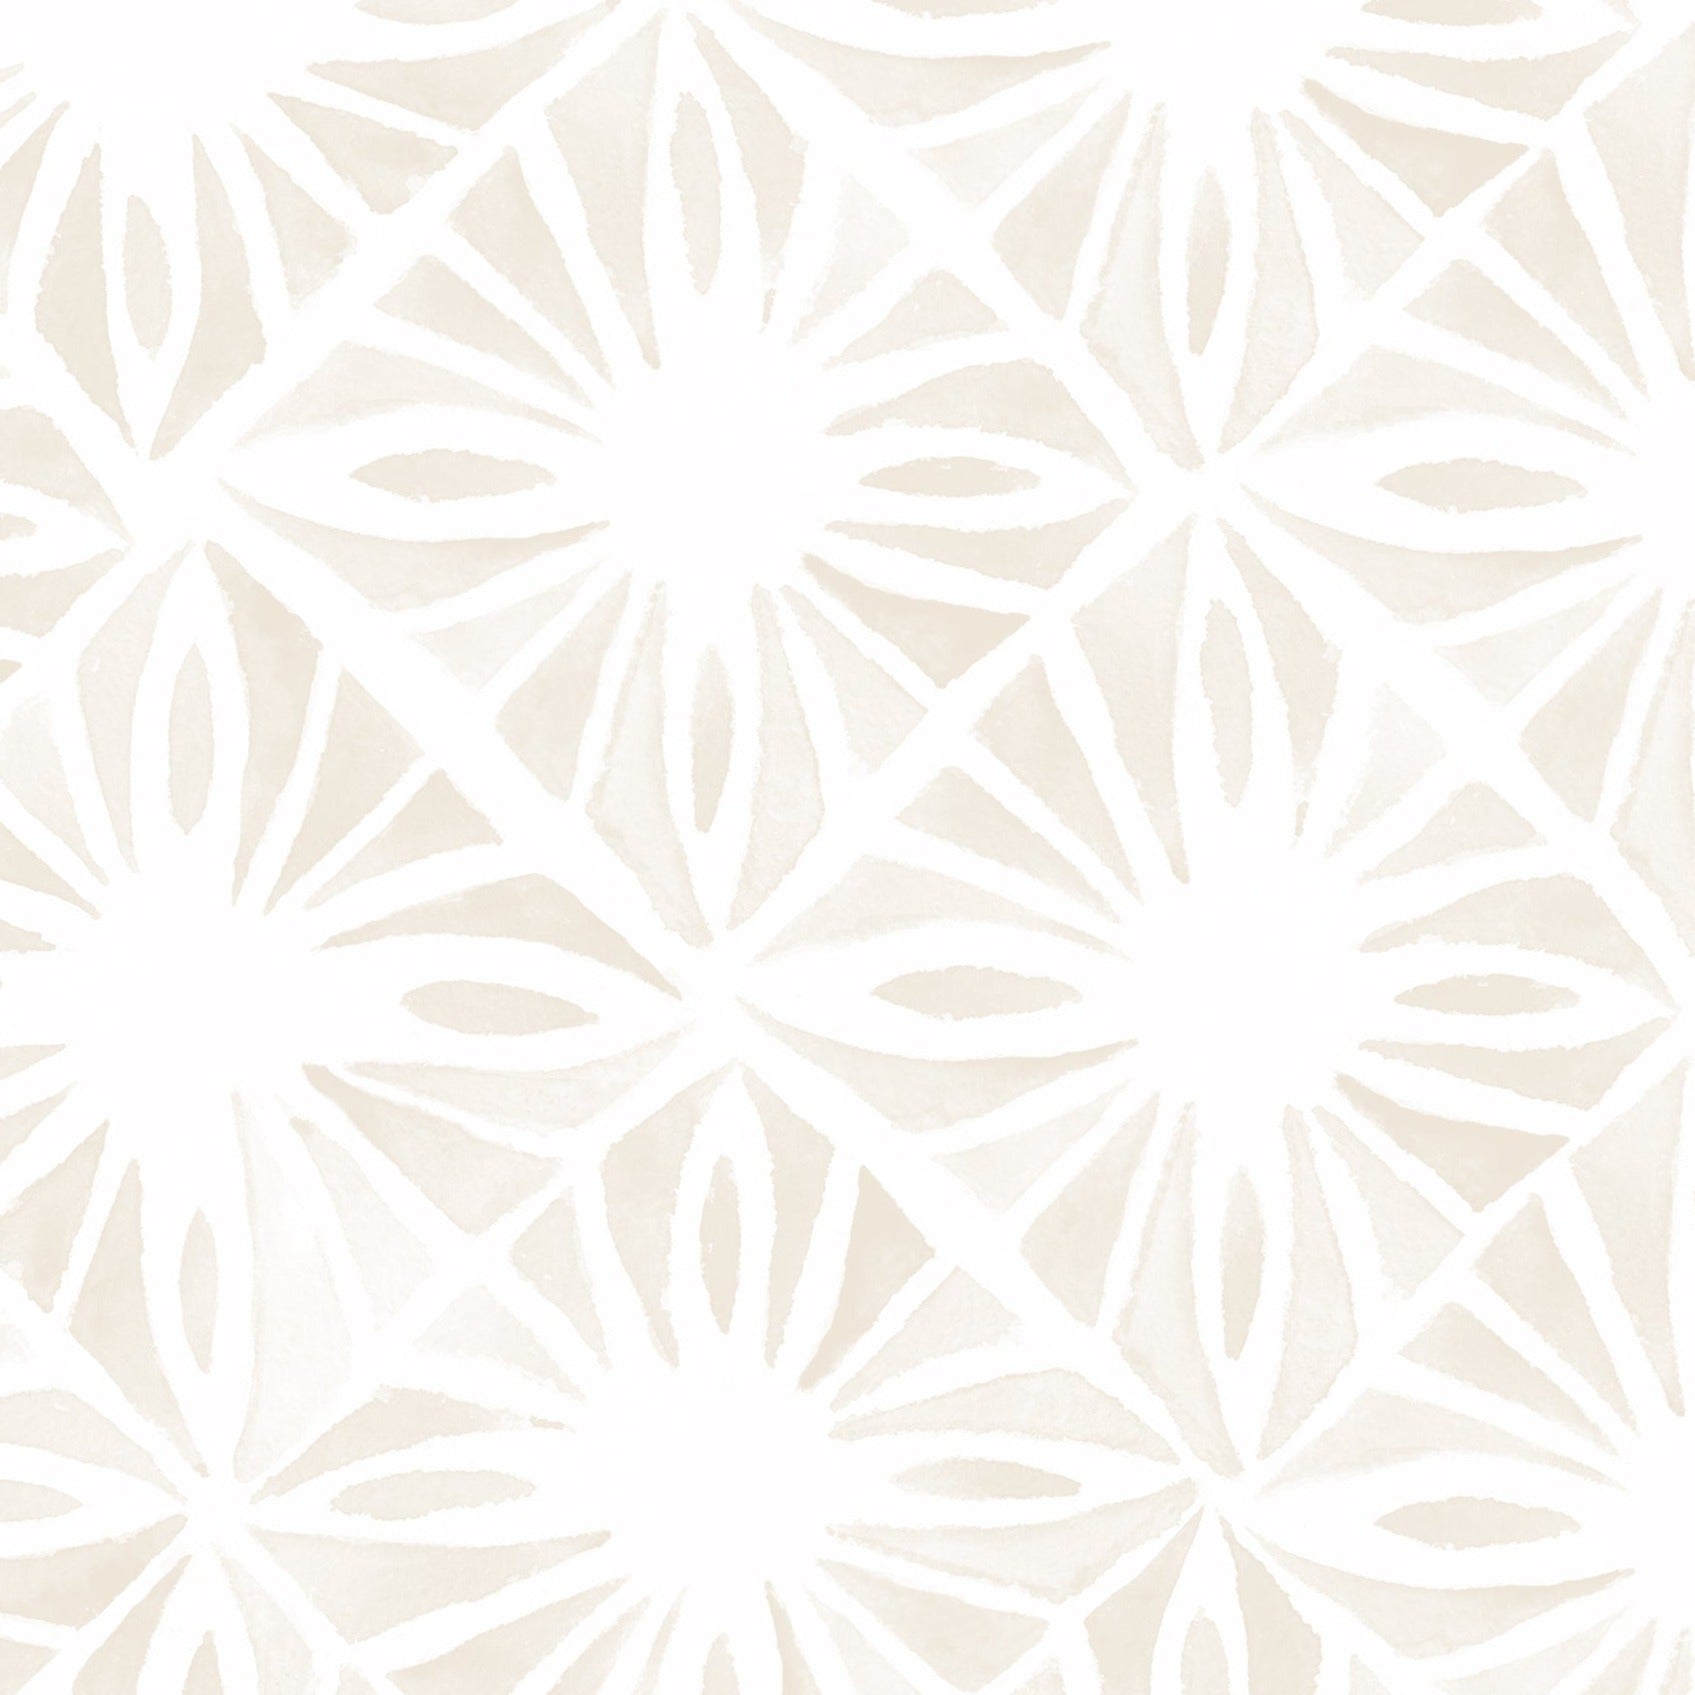 A close-up of the Moroccan Tile Wallpaper II - Ecru, highlighting the beautiful detail of the pattern. The design's soft ecru tones on a clean white base offer a contemporary yet timeless look suitable for any room looking for a touch of understated sophistication.